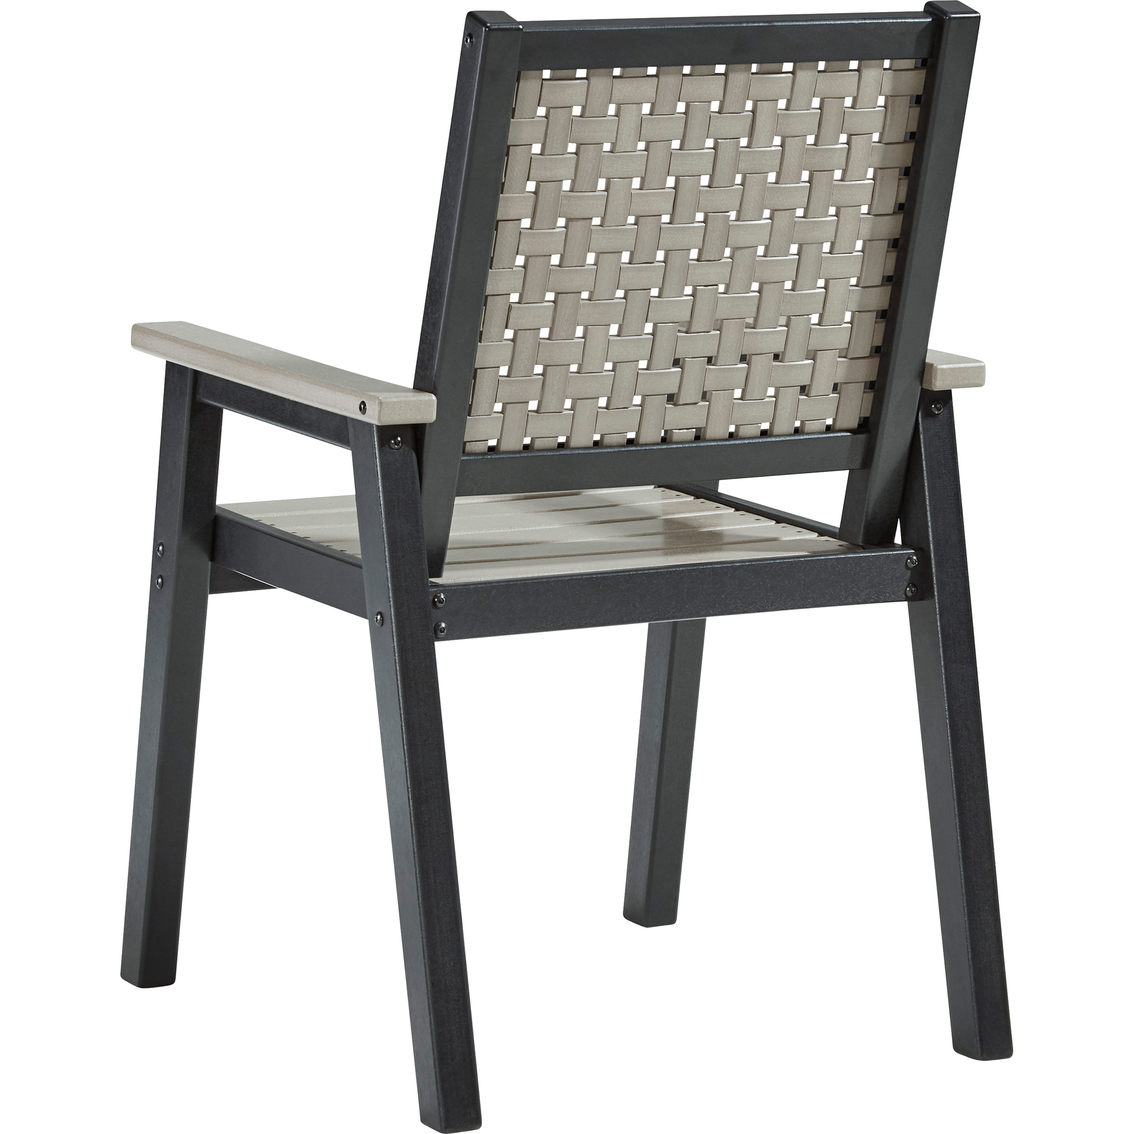 Signature Design by Ashley Mount Valley Arm Chair 2 pk. - Image 3 of 7